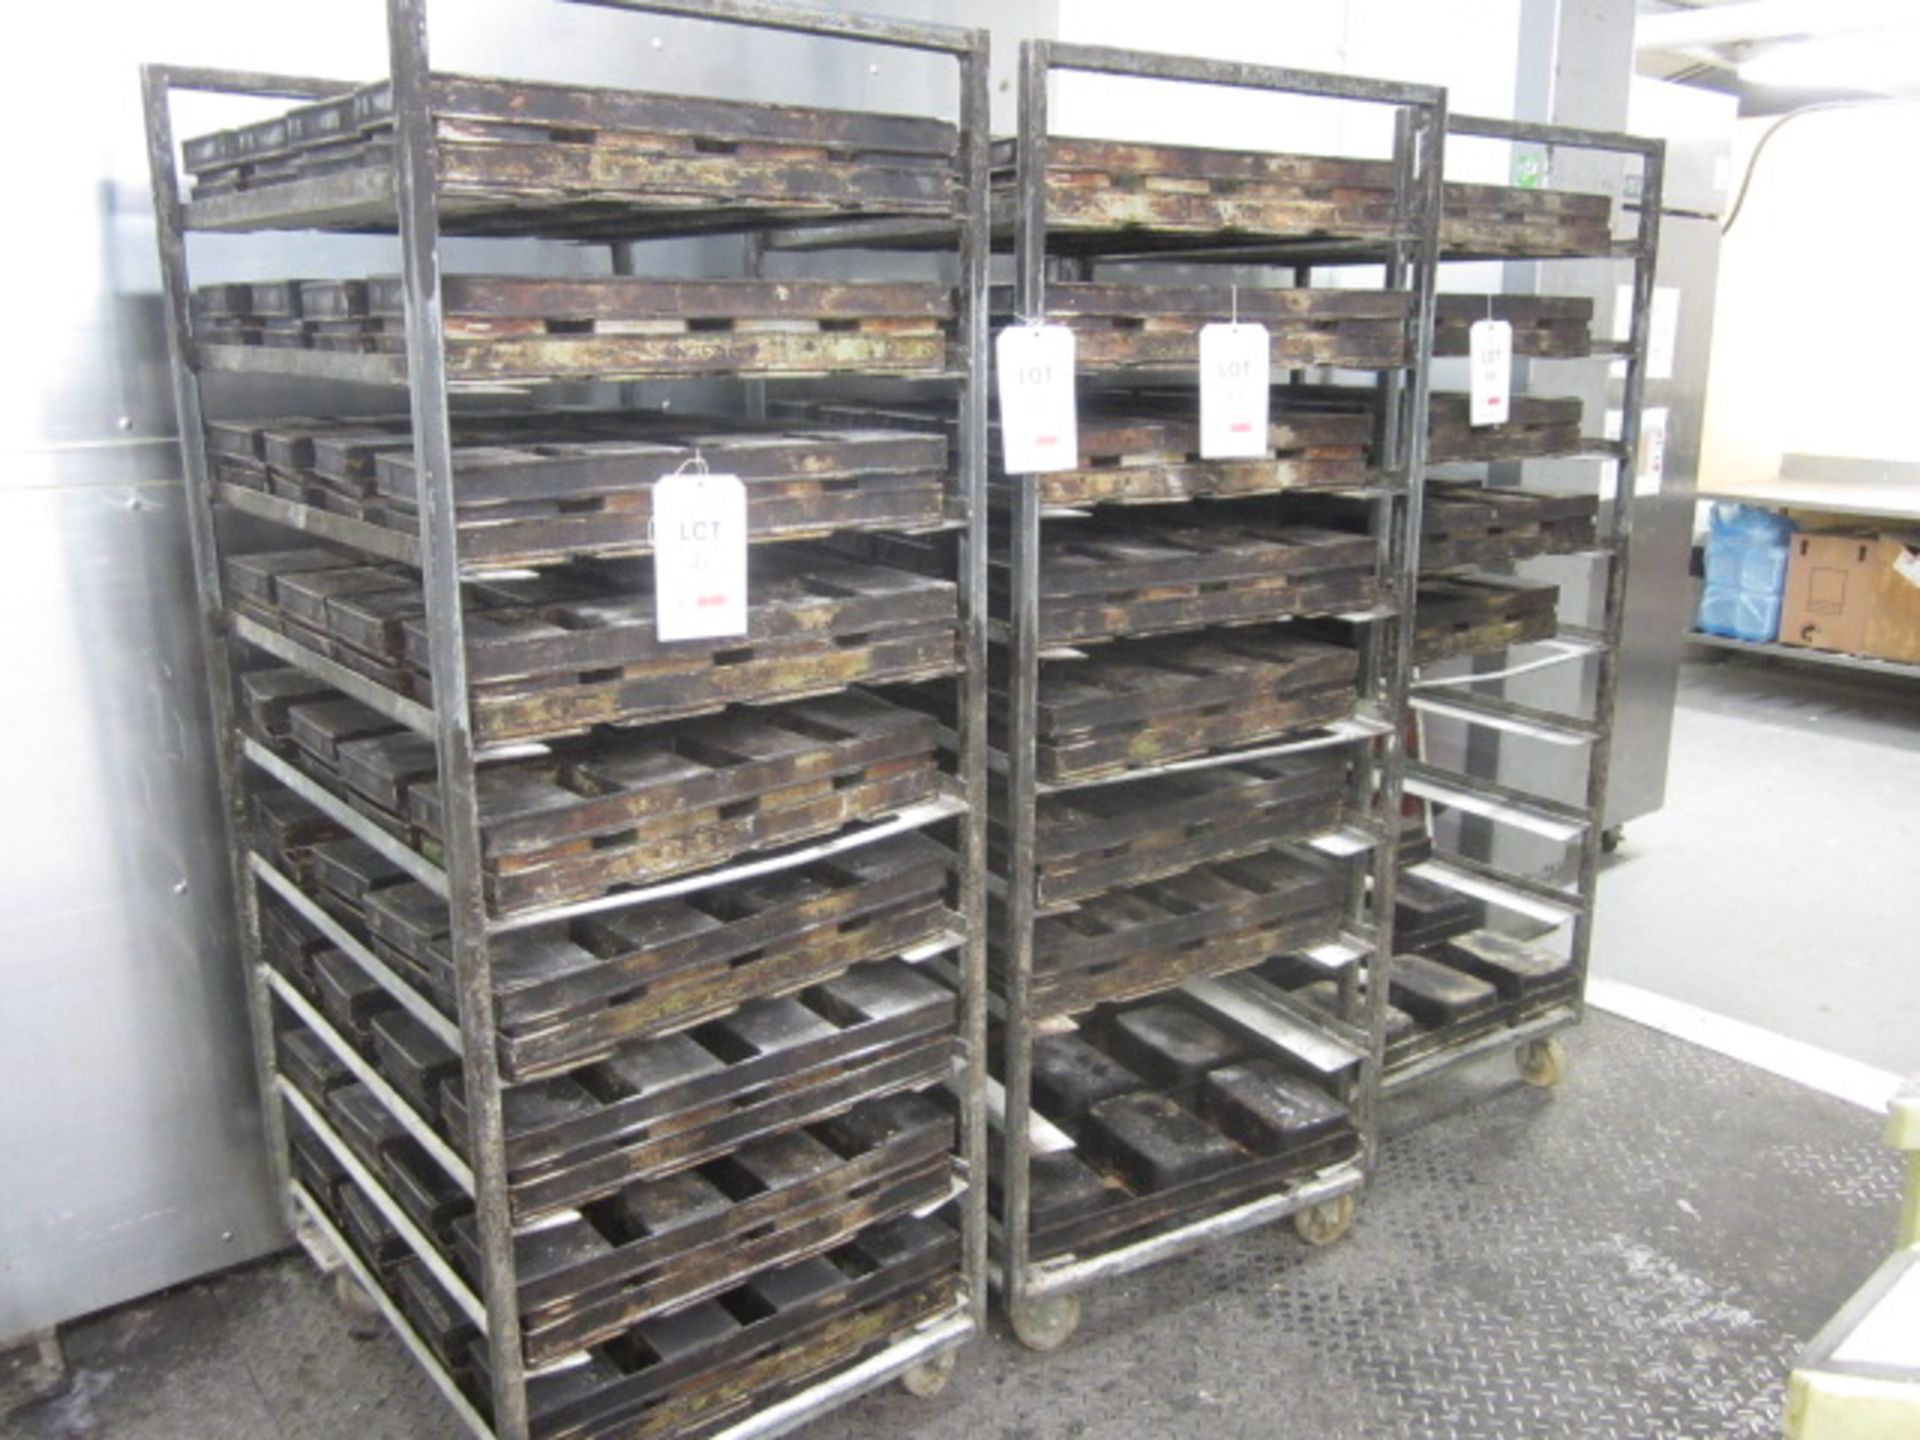 Three Galvanised steel 9-shelf mobile bakers tray racks (excluding contents)